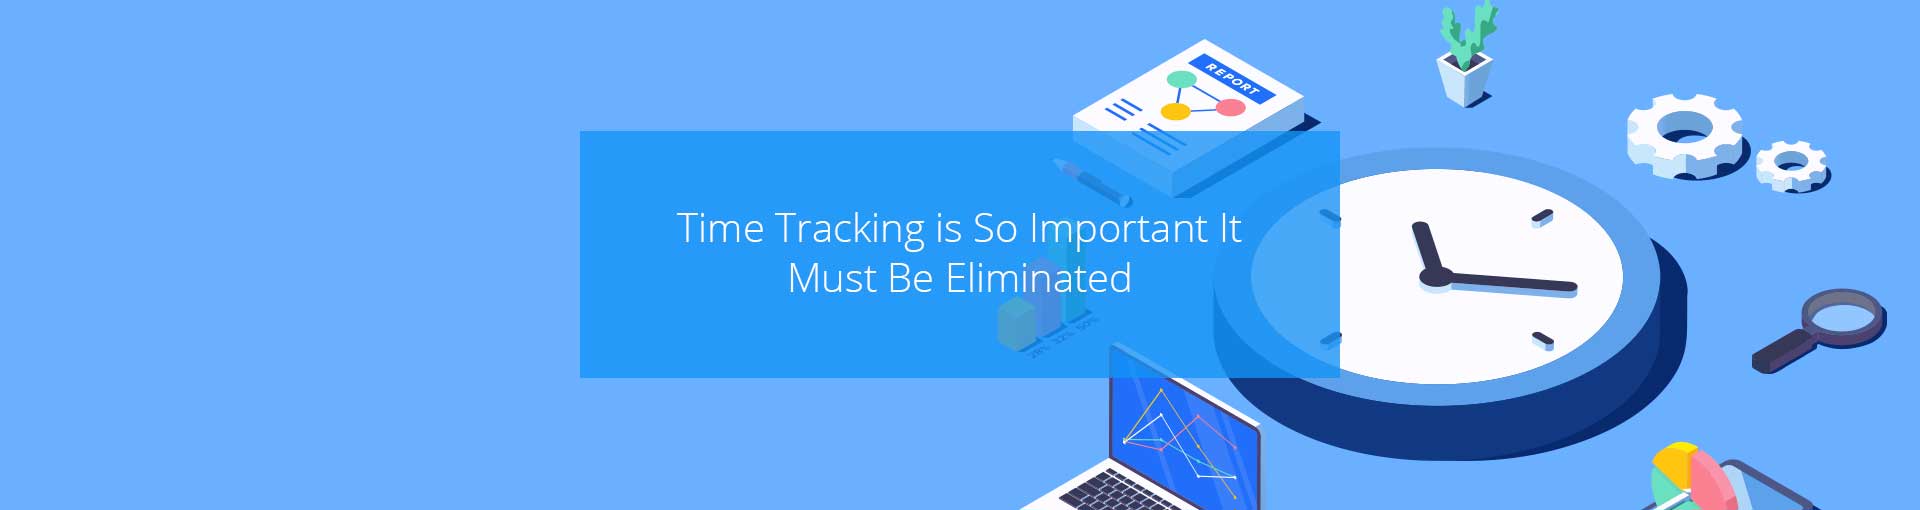 Time Tracking is So Important It Must Be Eliminated Featured Image